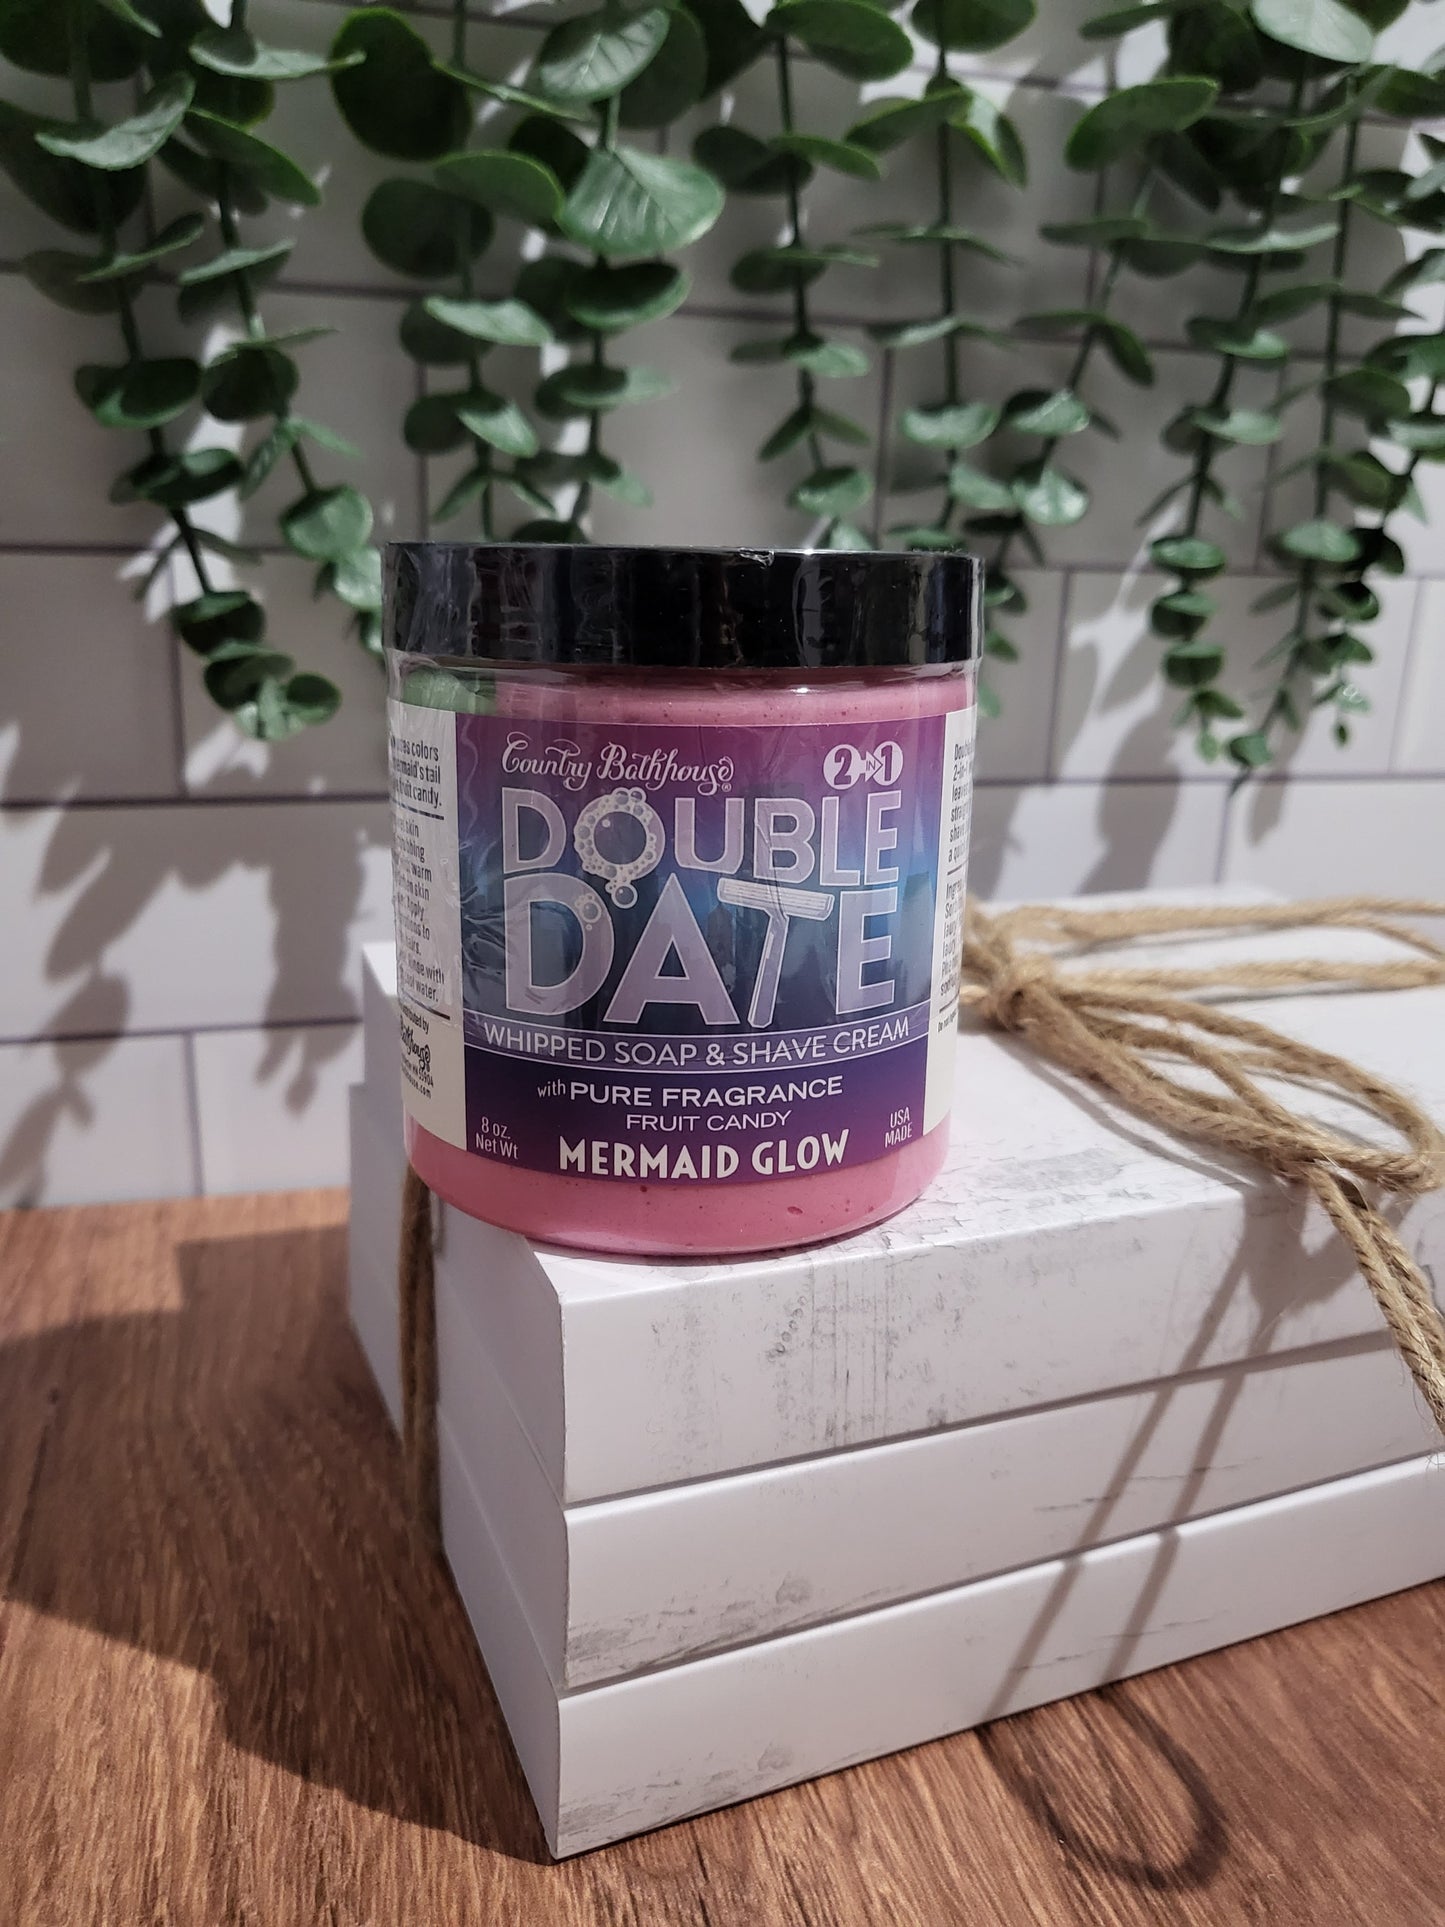 Double Date Whipped Soap & Shave Cream - Mermaid Glow